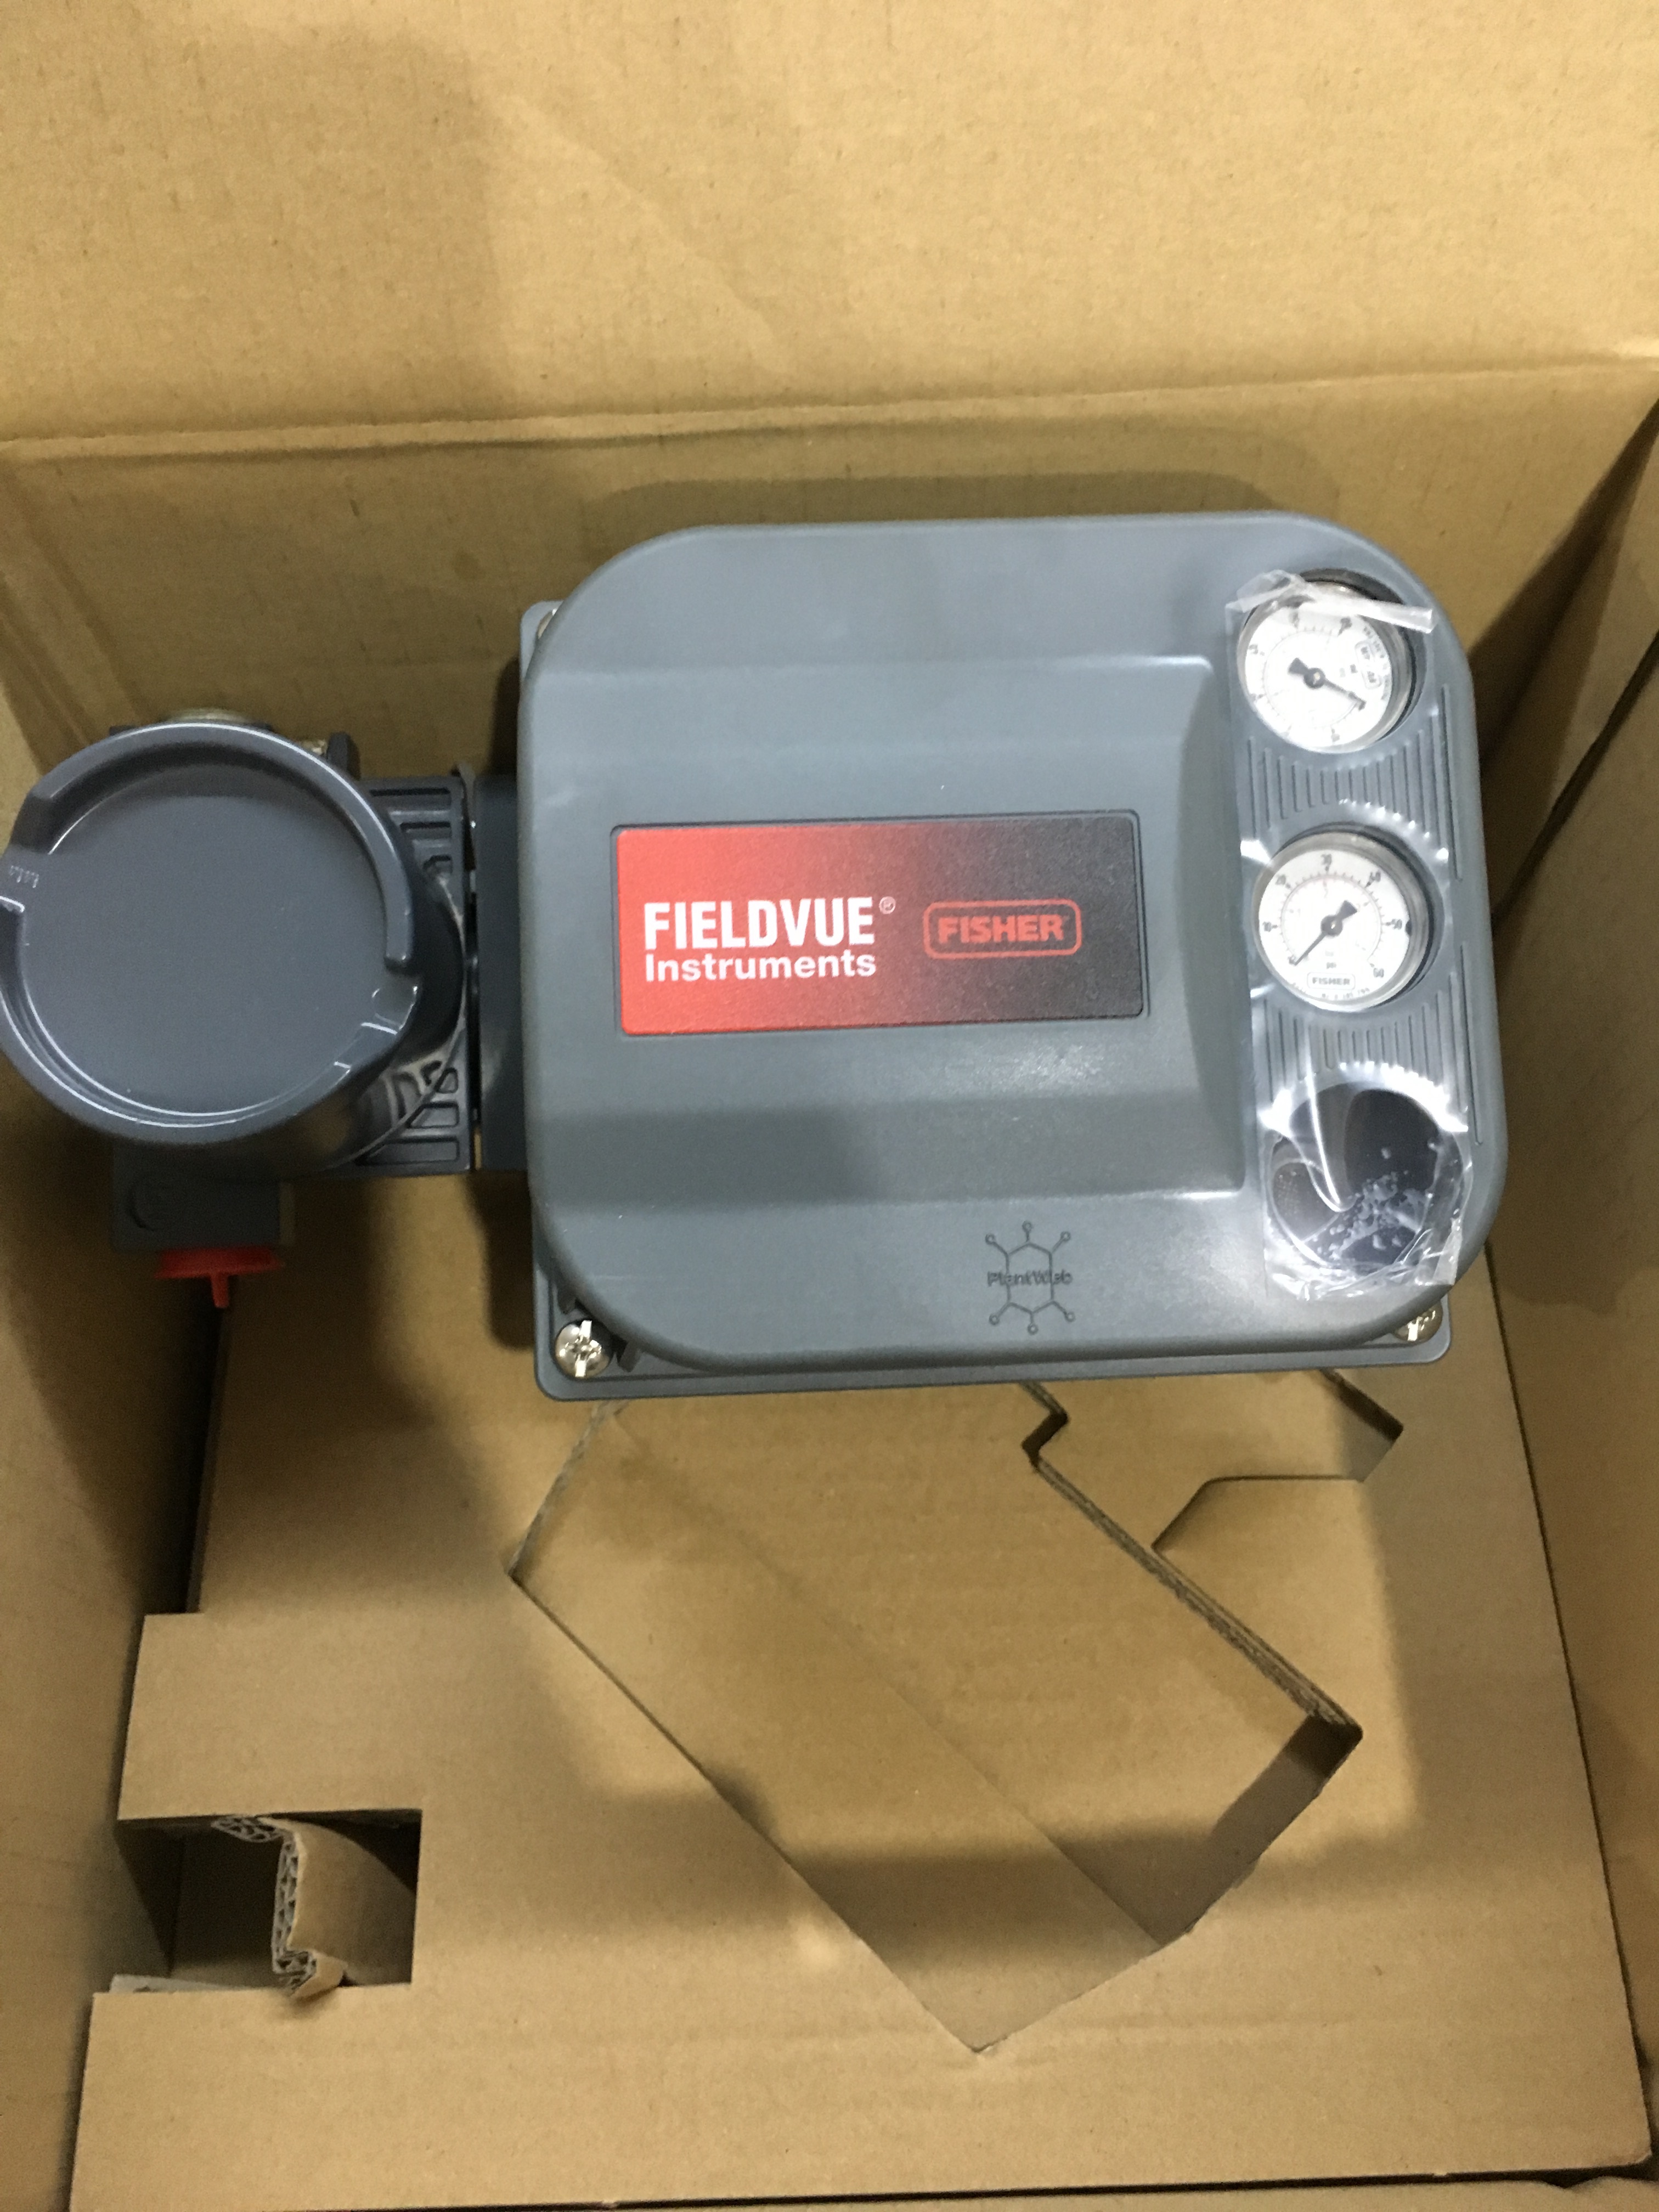 The delivery of fisher DVC6200 positioner for valve